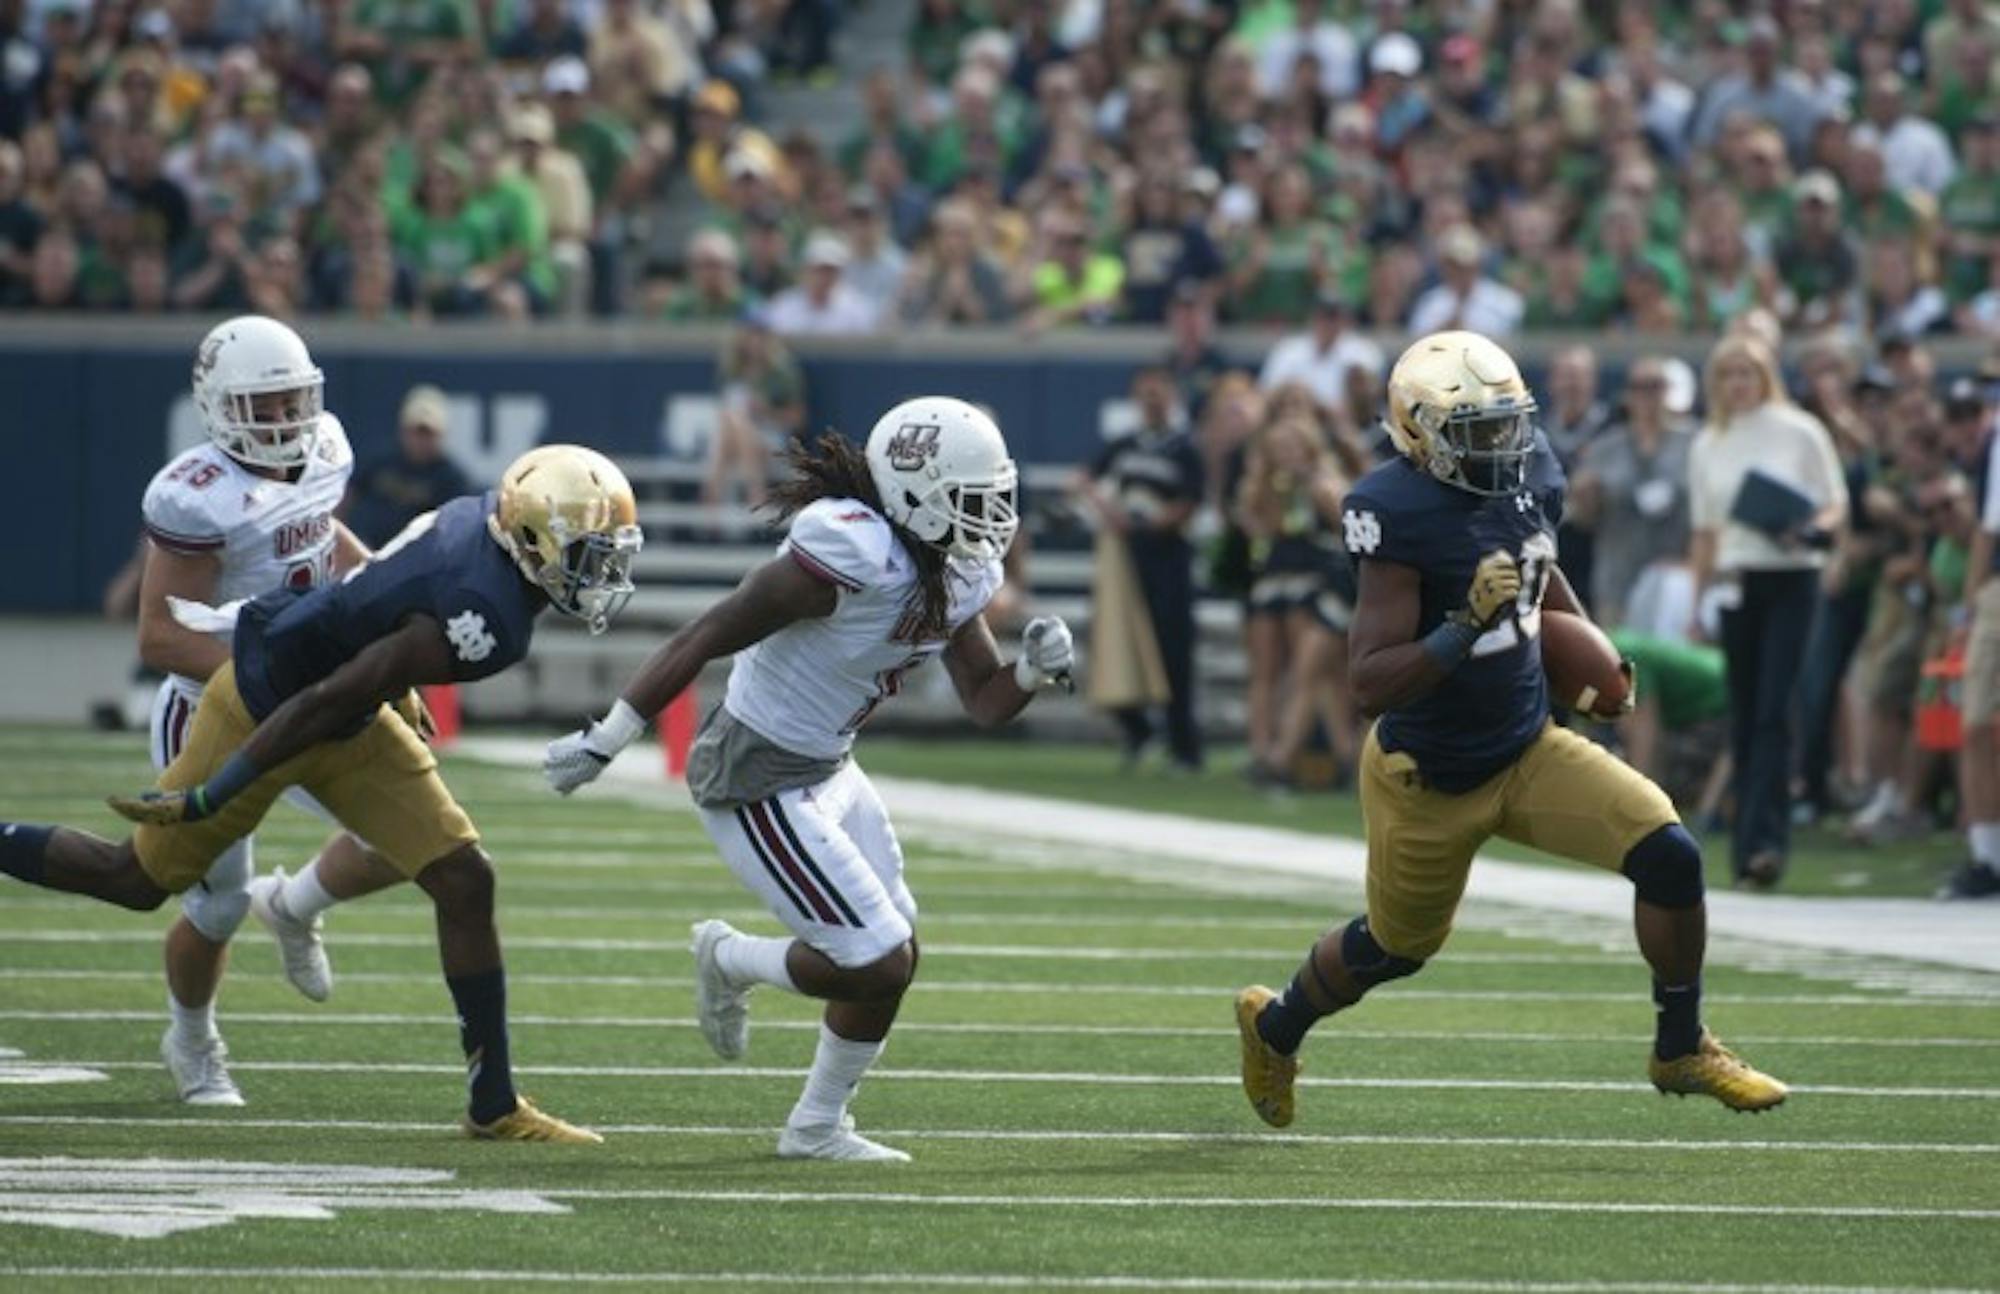 Irish senior running back C.J. Prosise turns the corner during his first-quarter, 57-yard touchdown run that opened the scoring in Notre Dame’s 62-27 win over Massachusetts on Saturday at Notre Dame Stadium. It was the first of two scores on the day for Prosise, who topped 100 rushing yards for the third consecutive game.